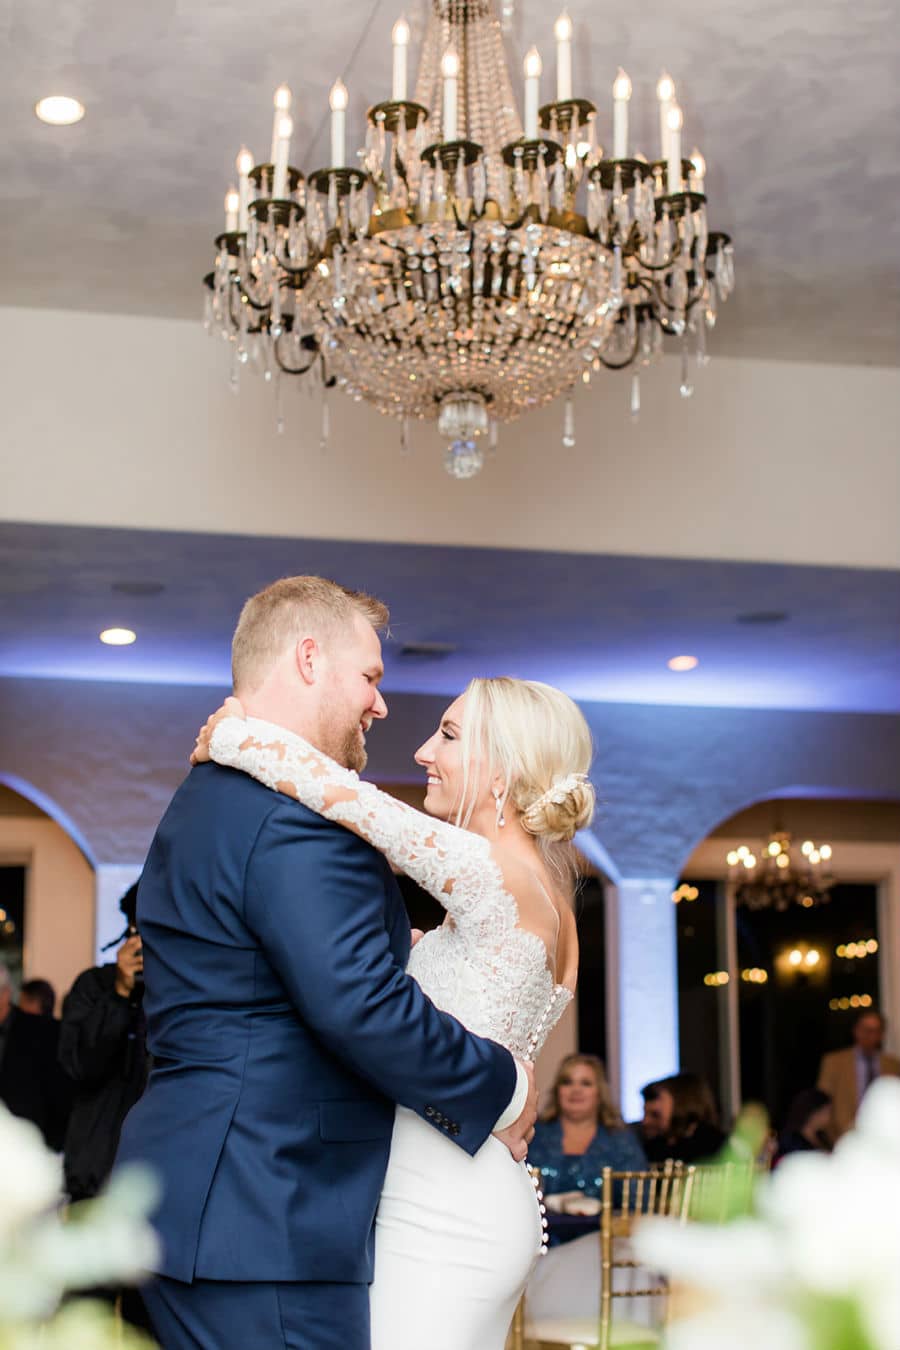 Bride's and groom's first dance as a married couple